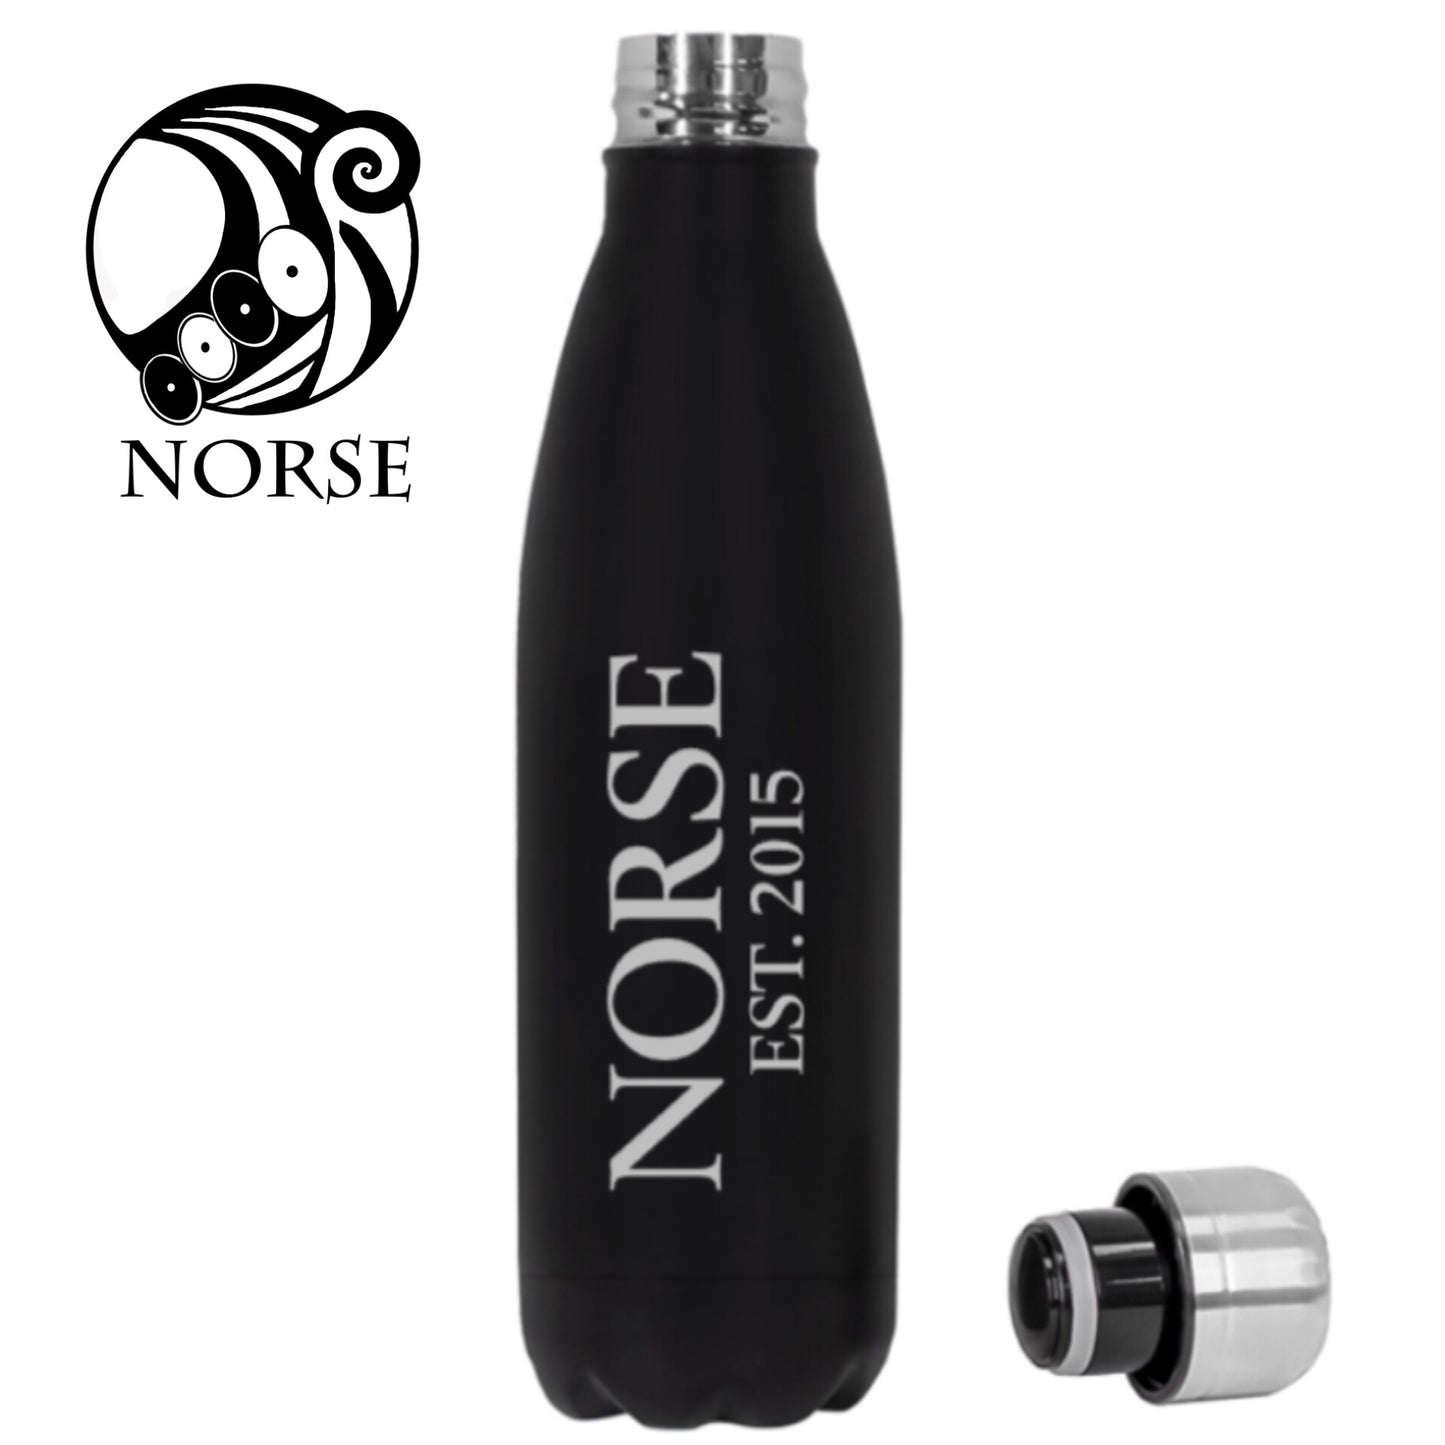 Norse EcoChill Insulated Water Bottle Black